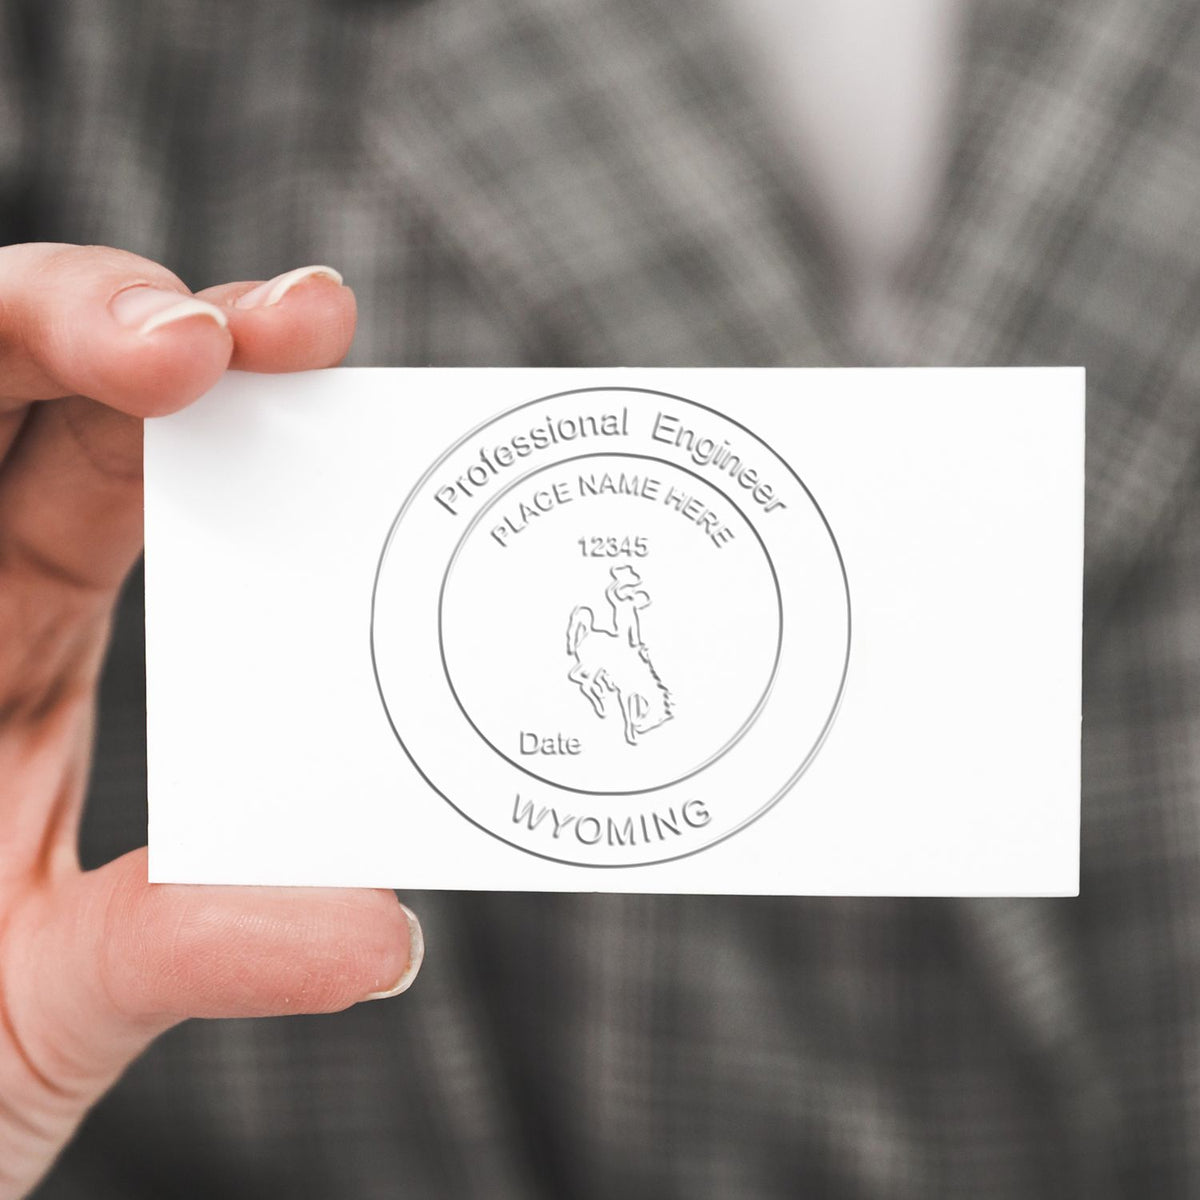 An in use photo of the Gift Wyoming Engineer Seal showing a sample imprint on a cardstock